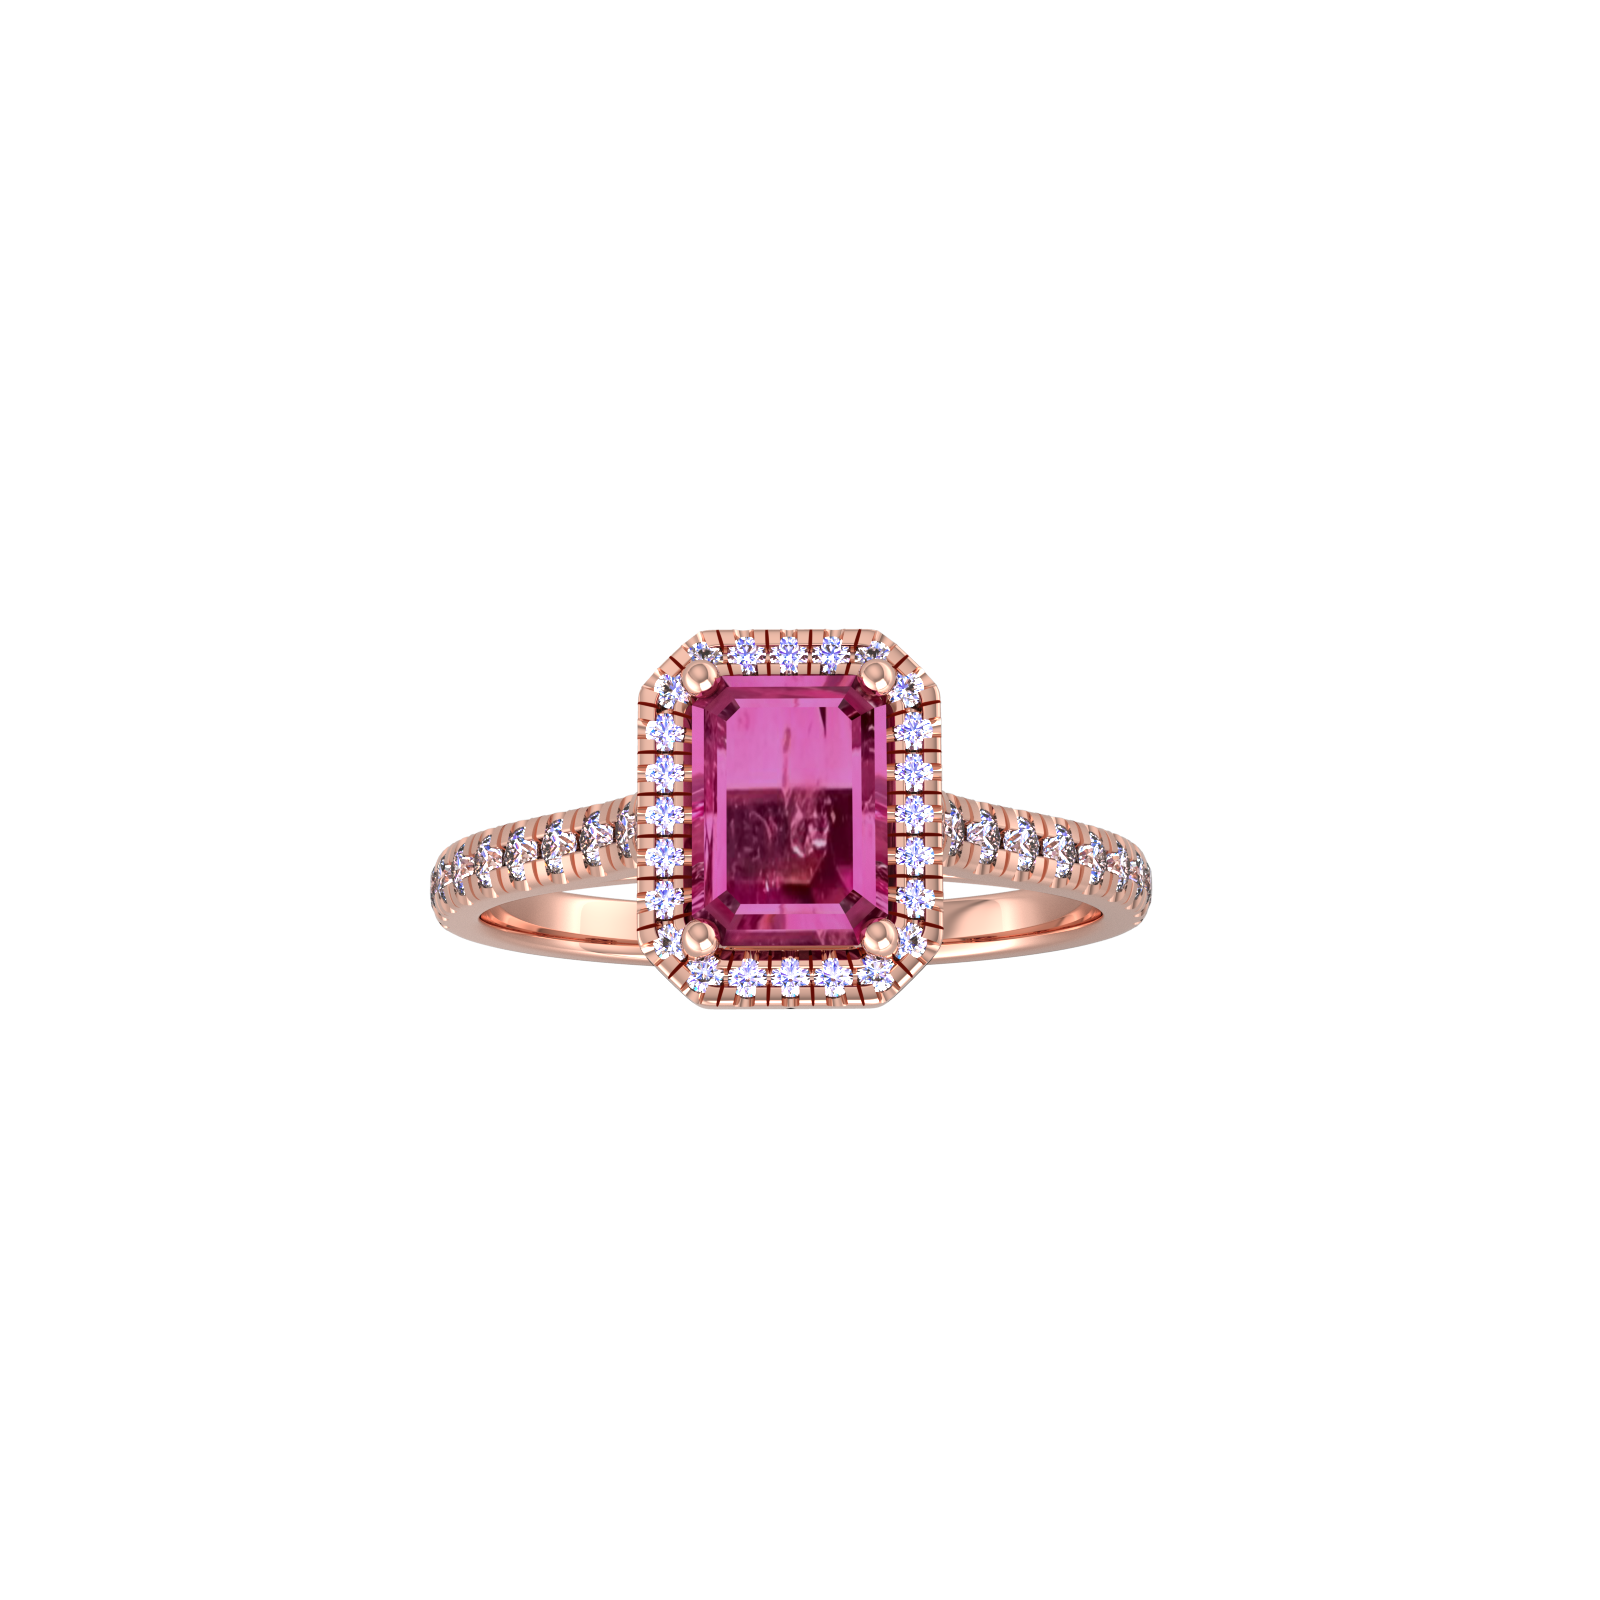 9ct Rose Gold Pink Tourmaline & Diamond Halo Ring with Diamond Shoulders - Ring Size H.5